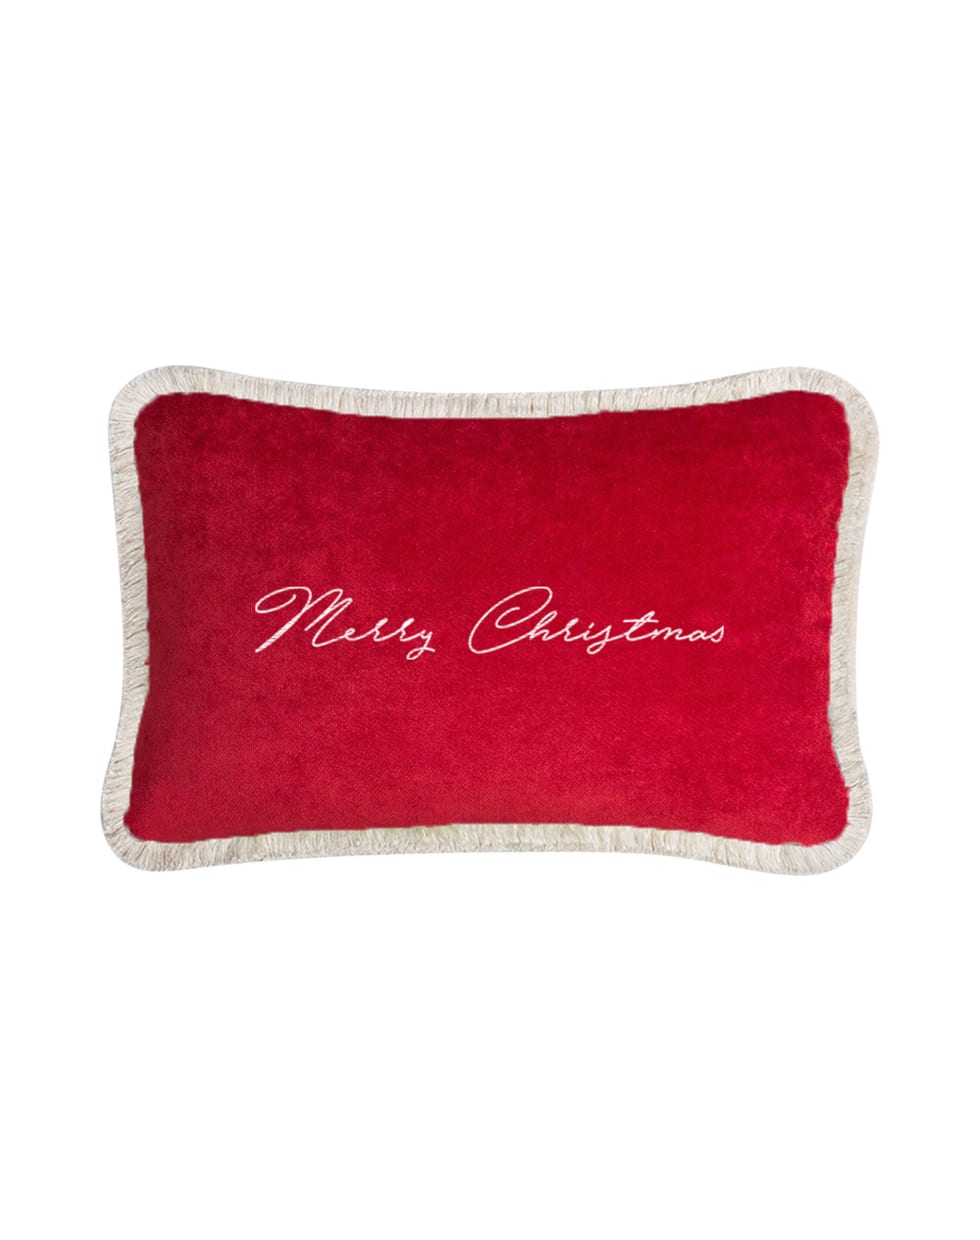 Lo Decor Happy Pillow Merry Christmas - red / white